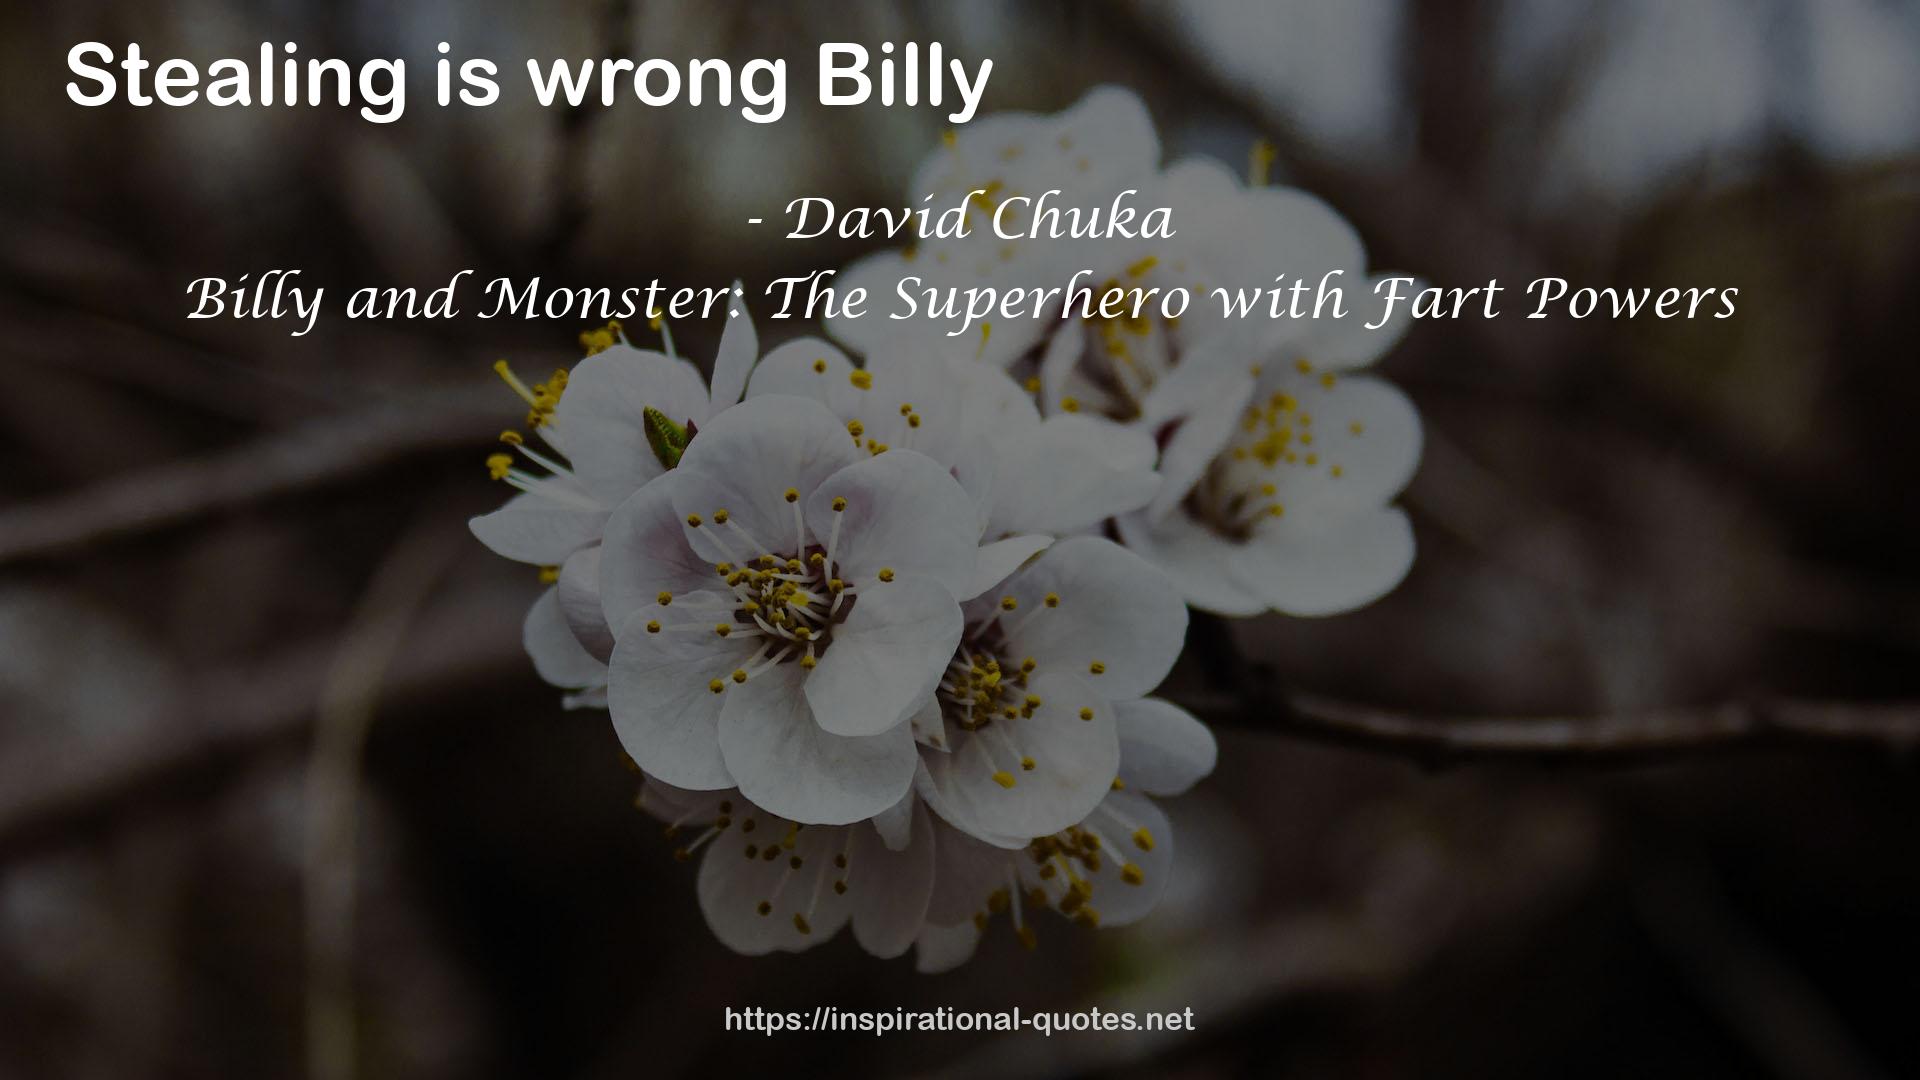 Billy and Monster: The Superhero with Fart Powers QUOTES